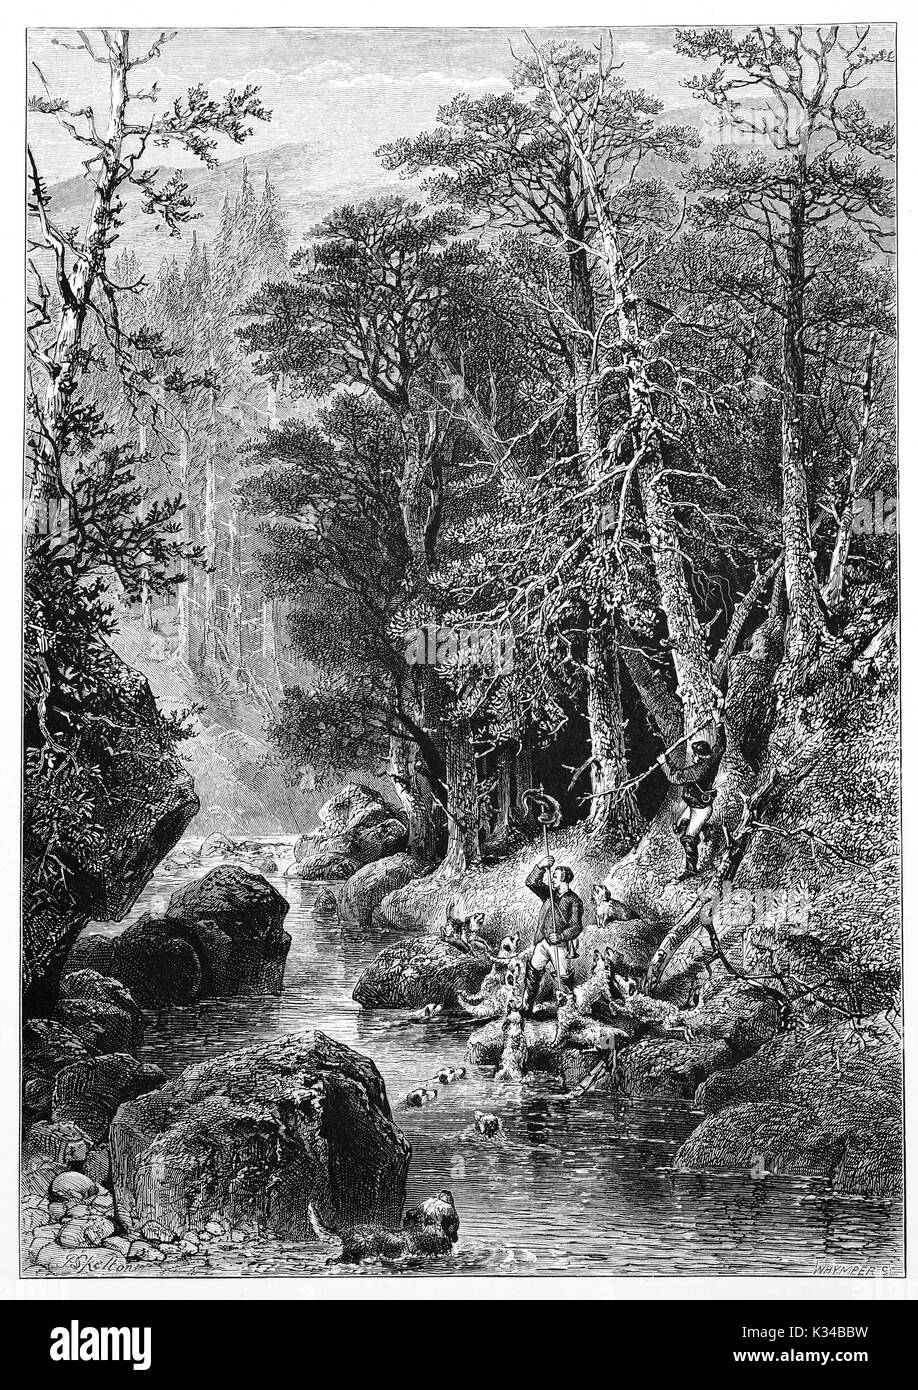 1870: Hunters and dogs on the River Dee runs through tall stands of larch and pine looming high above the rushing water.  Braemar, Aberdeenshire, Scotland Stock Photo